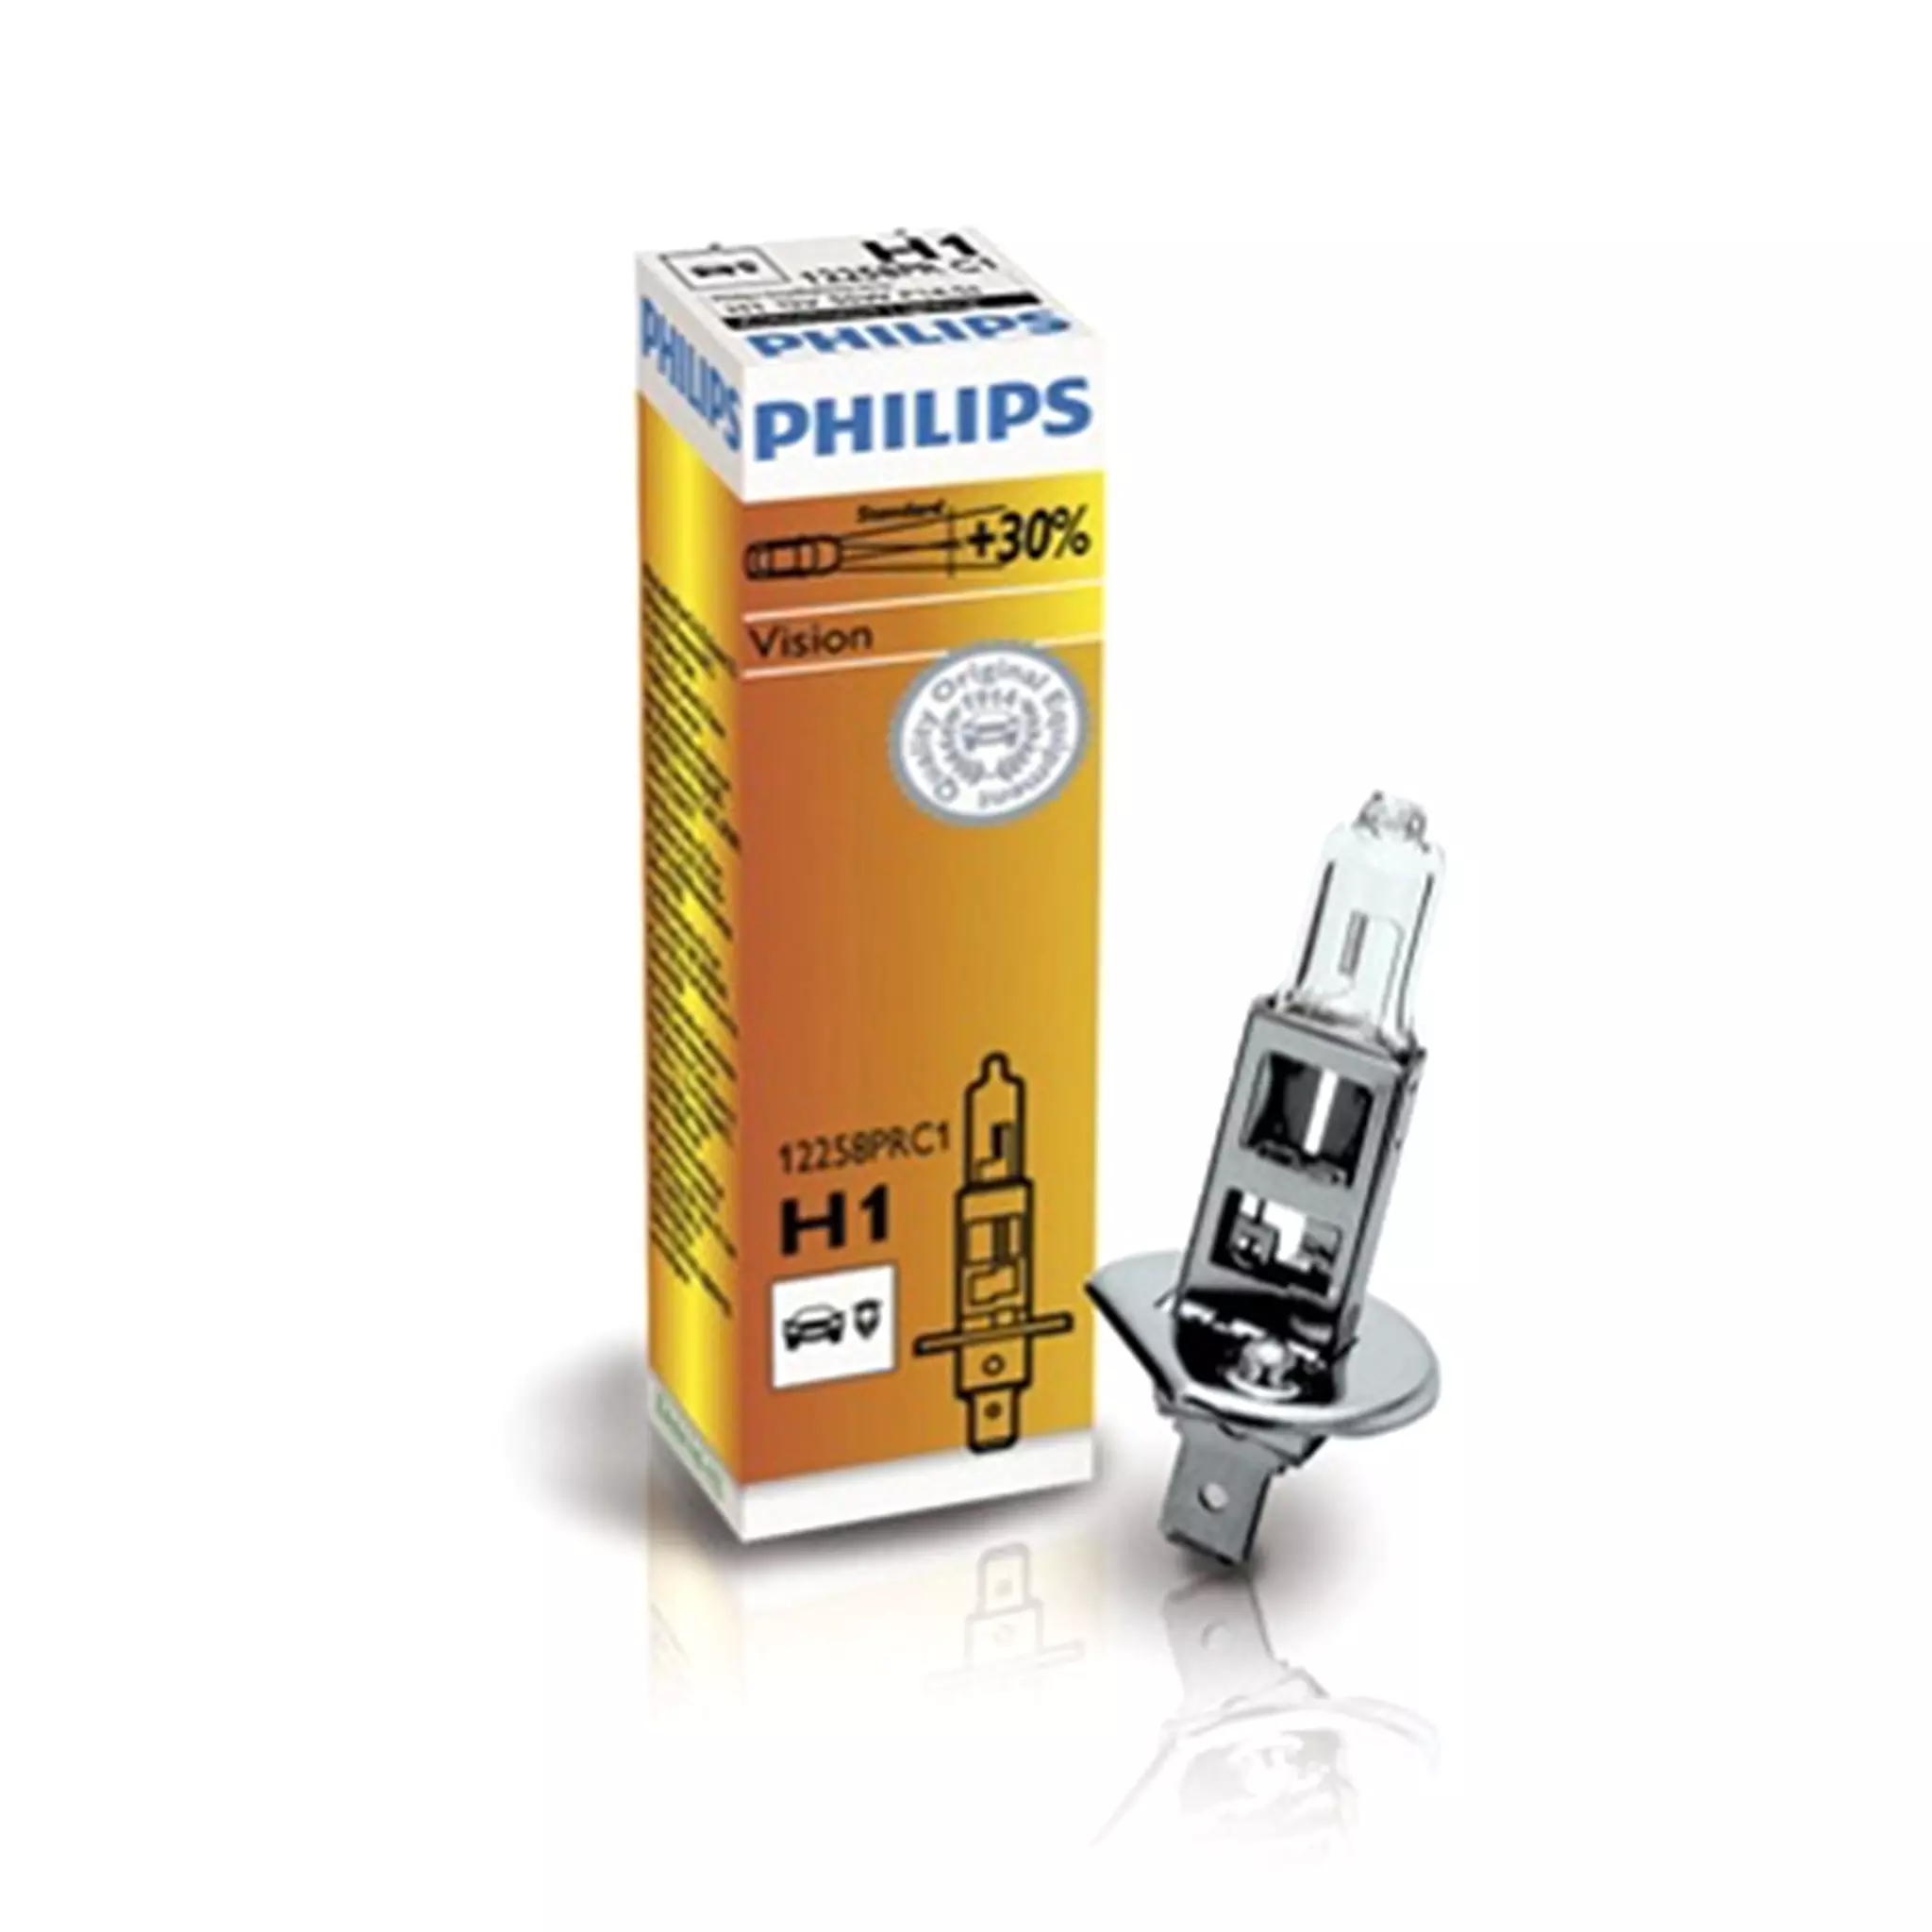 Halogeenipolttimo Philips Vision Plus, 55W, H1